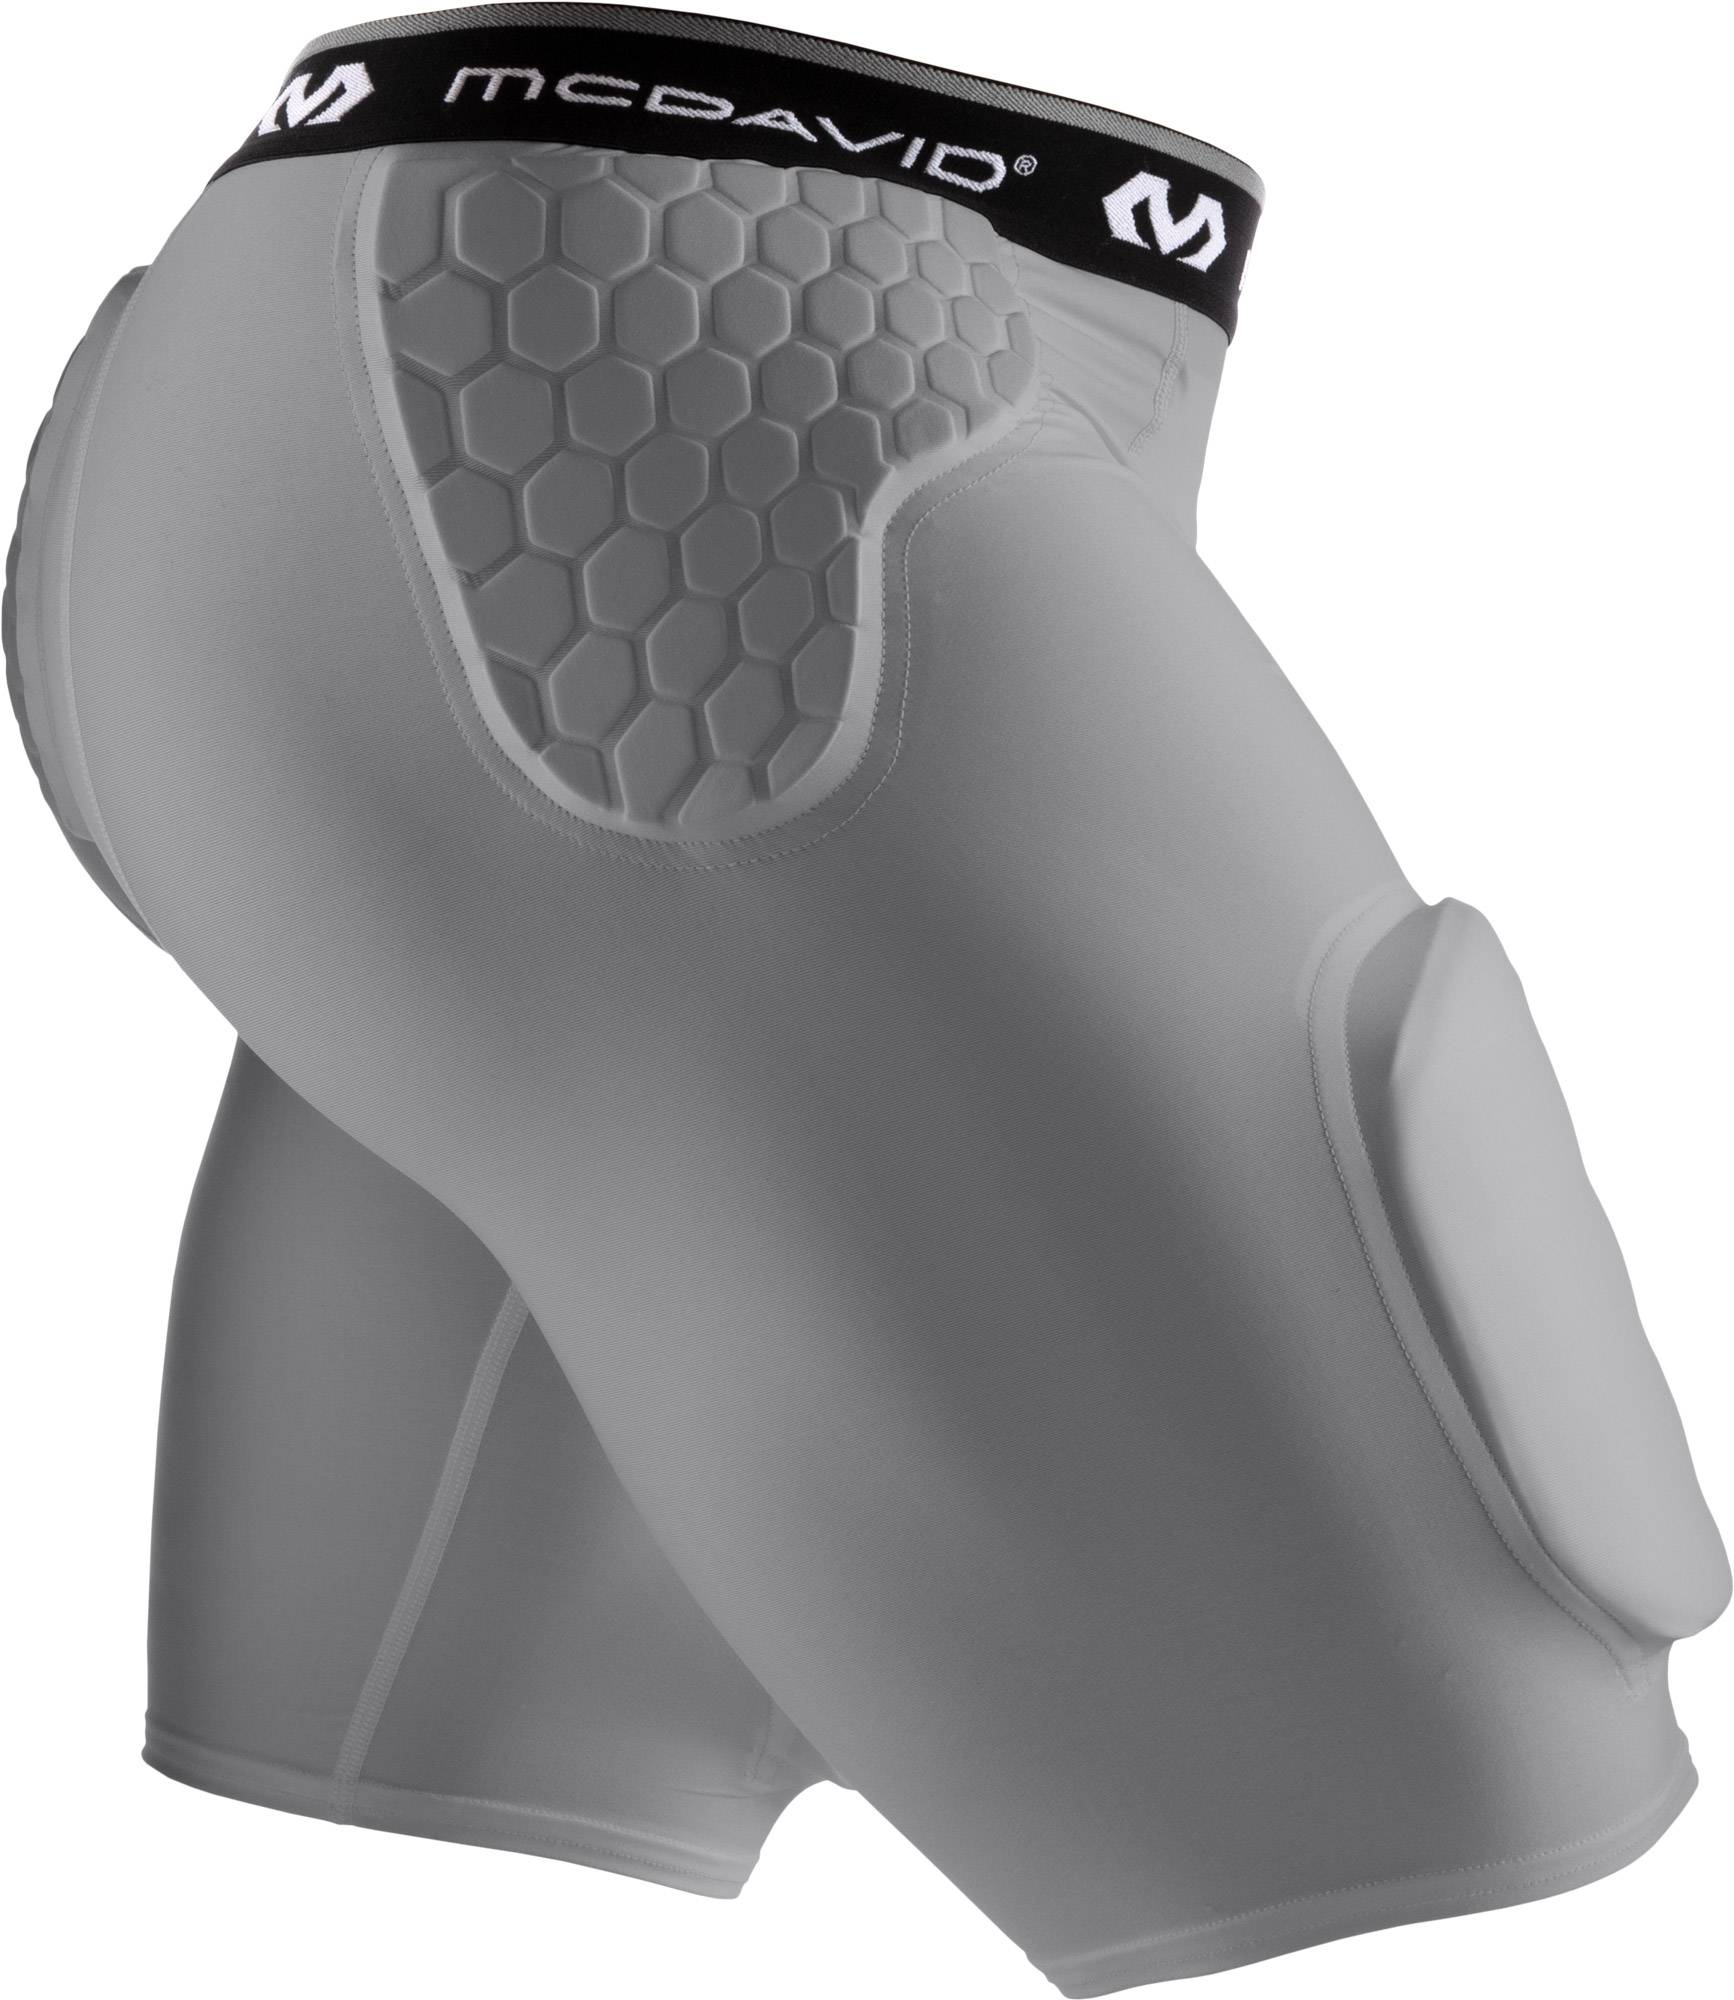 McDavid Hex Integrated Football Girdle Shorts w/ Built in Hex Pads Adult & Youth sizes 737Y 